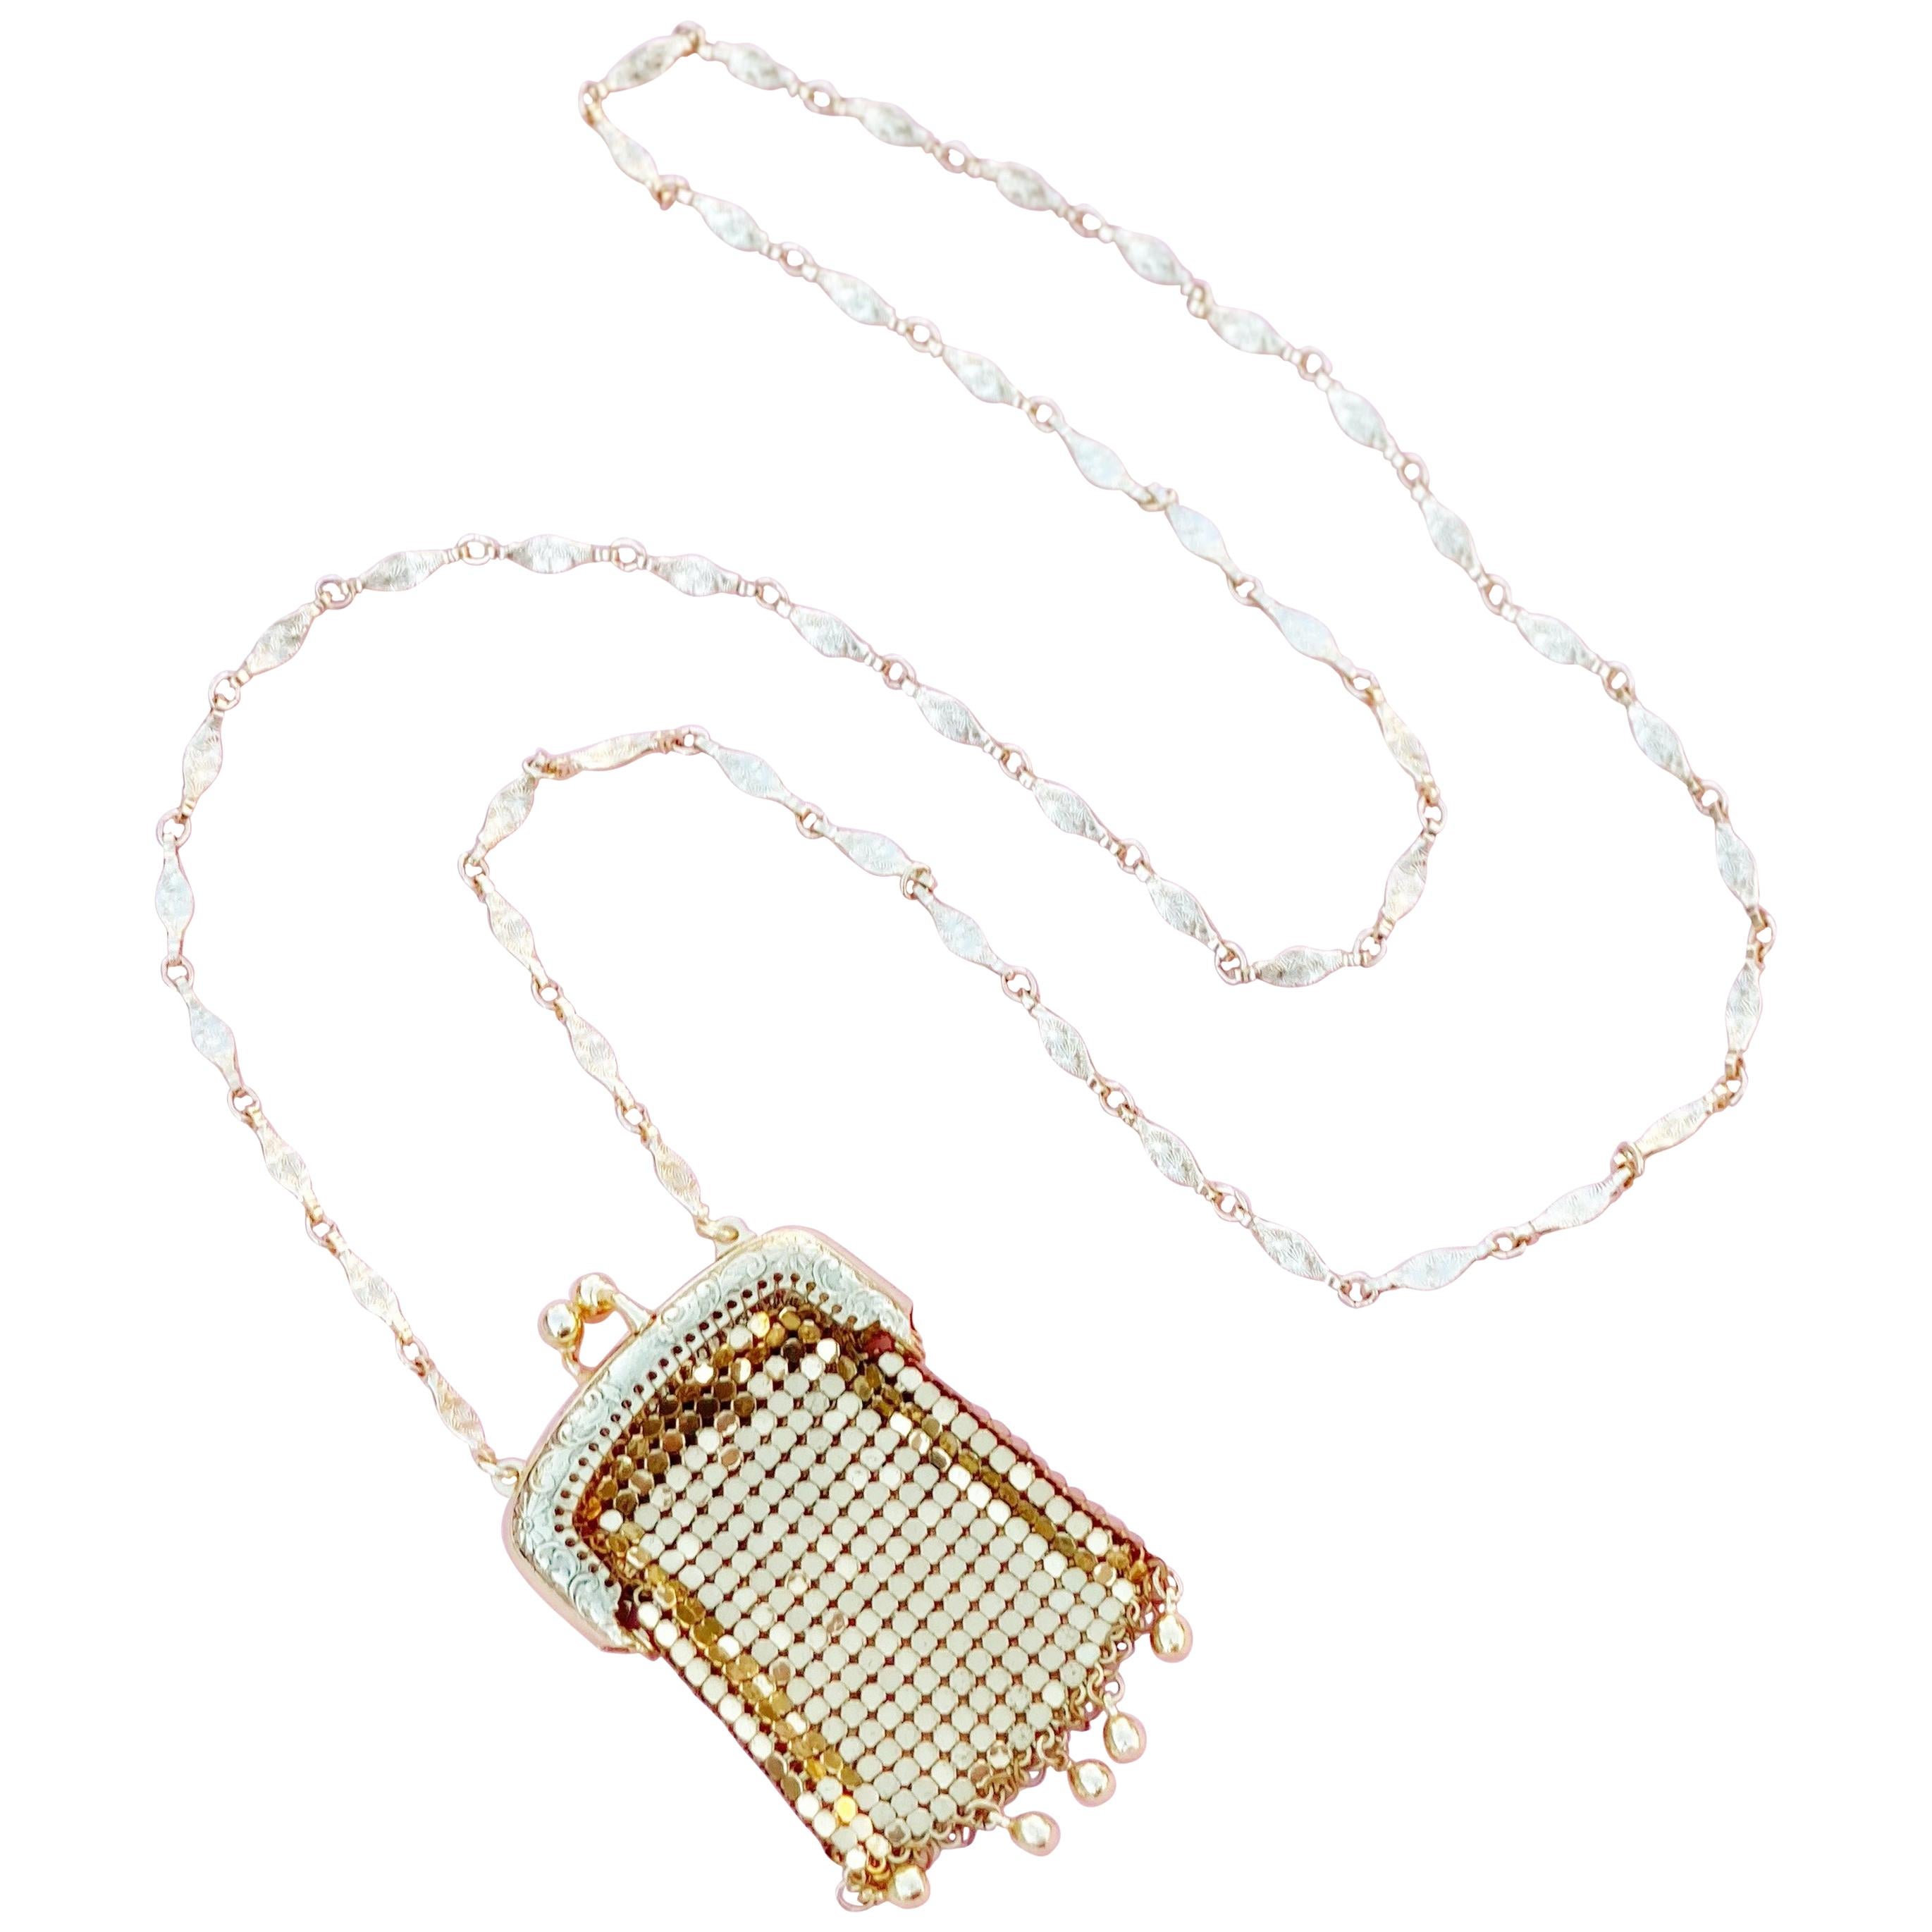 Vintage Gold Mesh Pouch Necklace by Whiting & Davis, 1960s